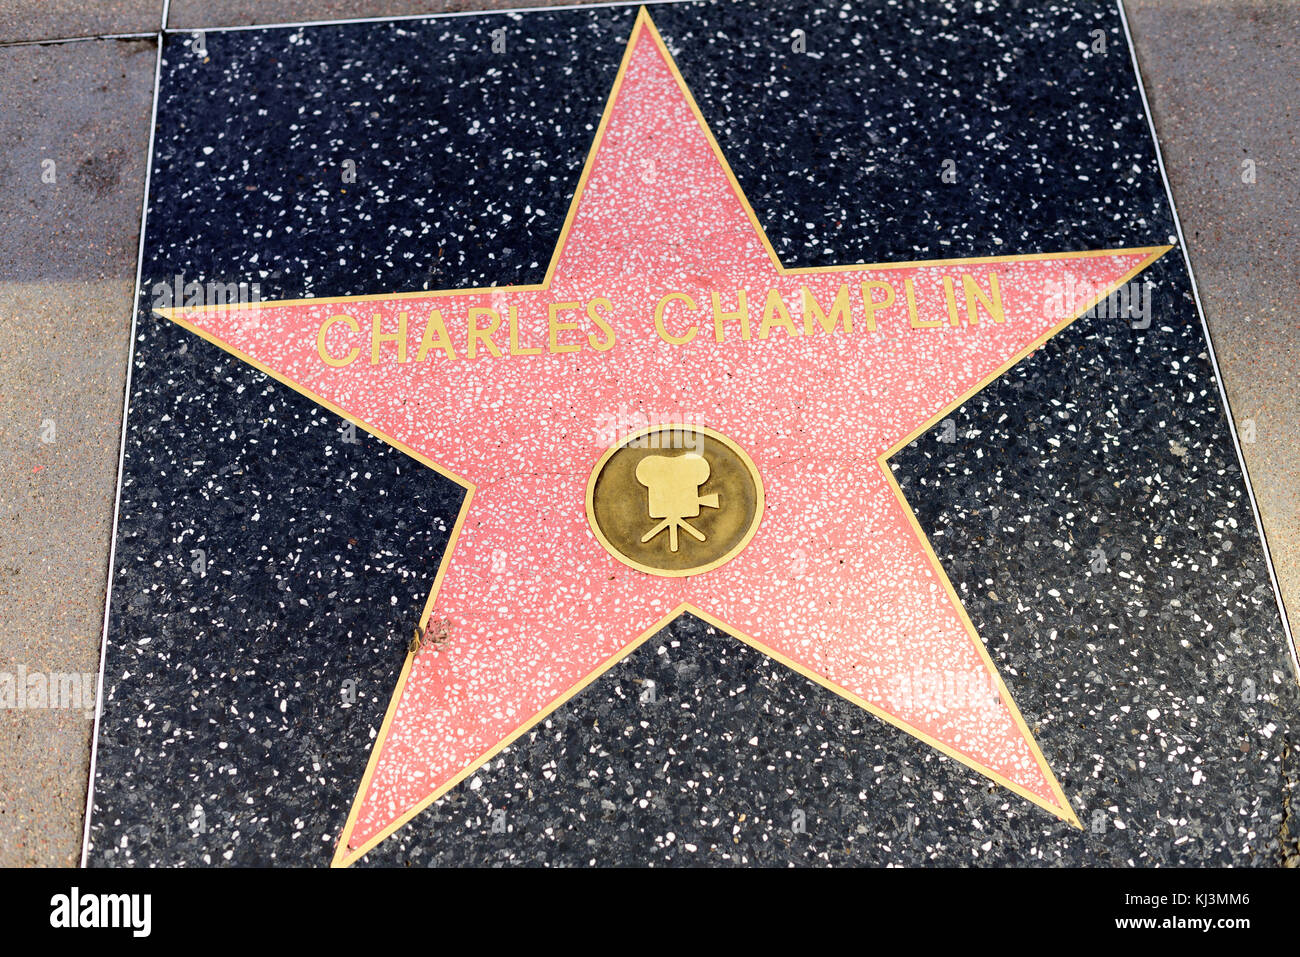 HOLLYWOOD, CA - DICEMBRE 06: Charles Champlin star sulla Hollywood Walk of Fame a Hollywood, California, il 6 dicembre 2016. Foto Stock